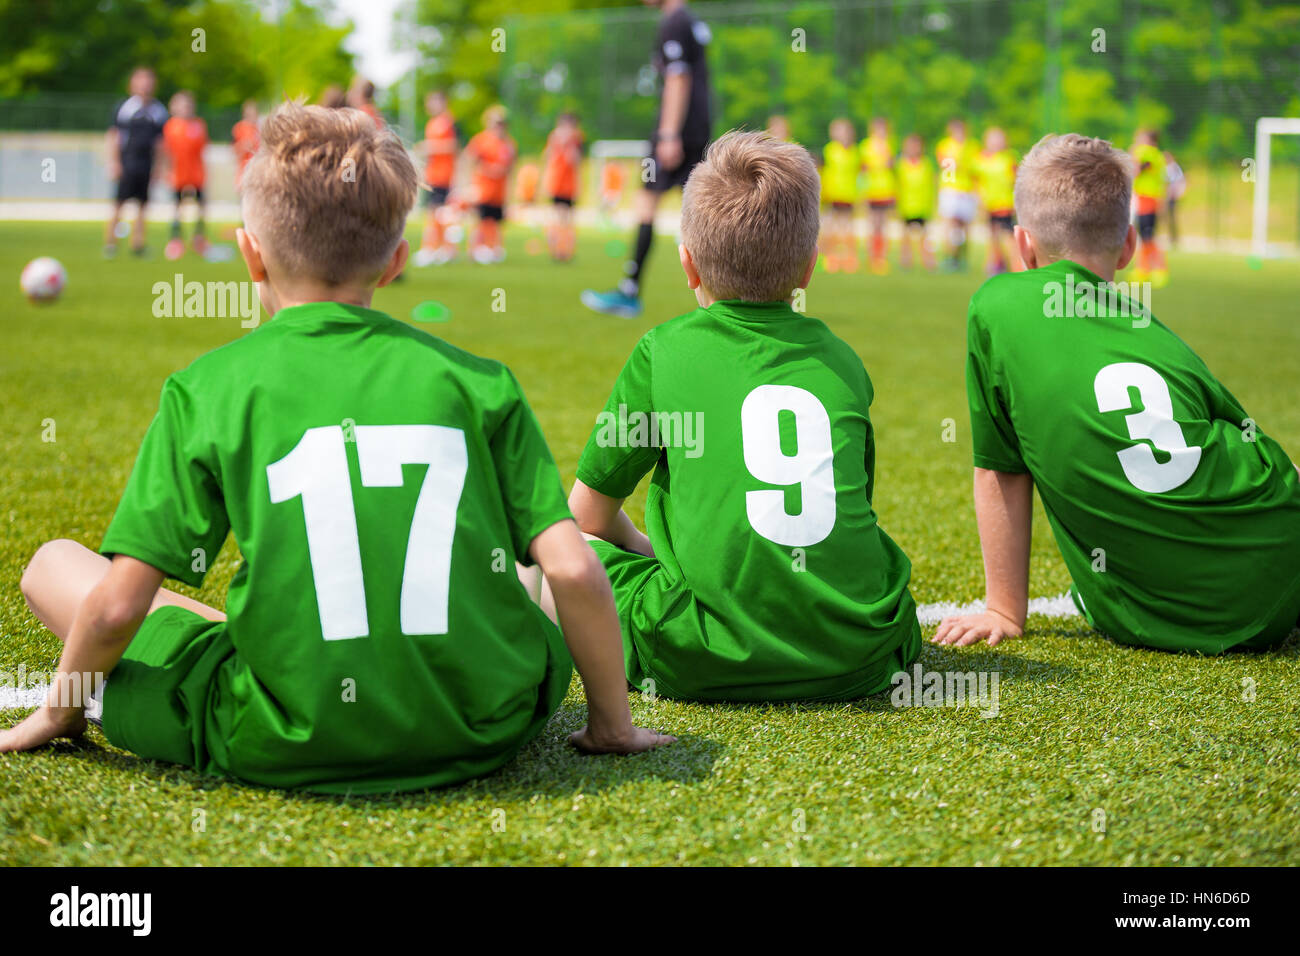 Kids Soccer Players Sitting on the Pitch. Young Boys of Football Team Sitting on Green Grass. Stock Photo